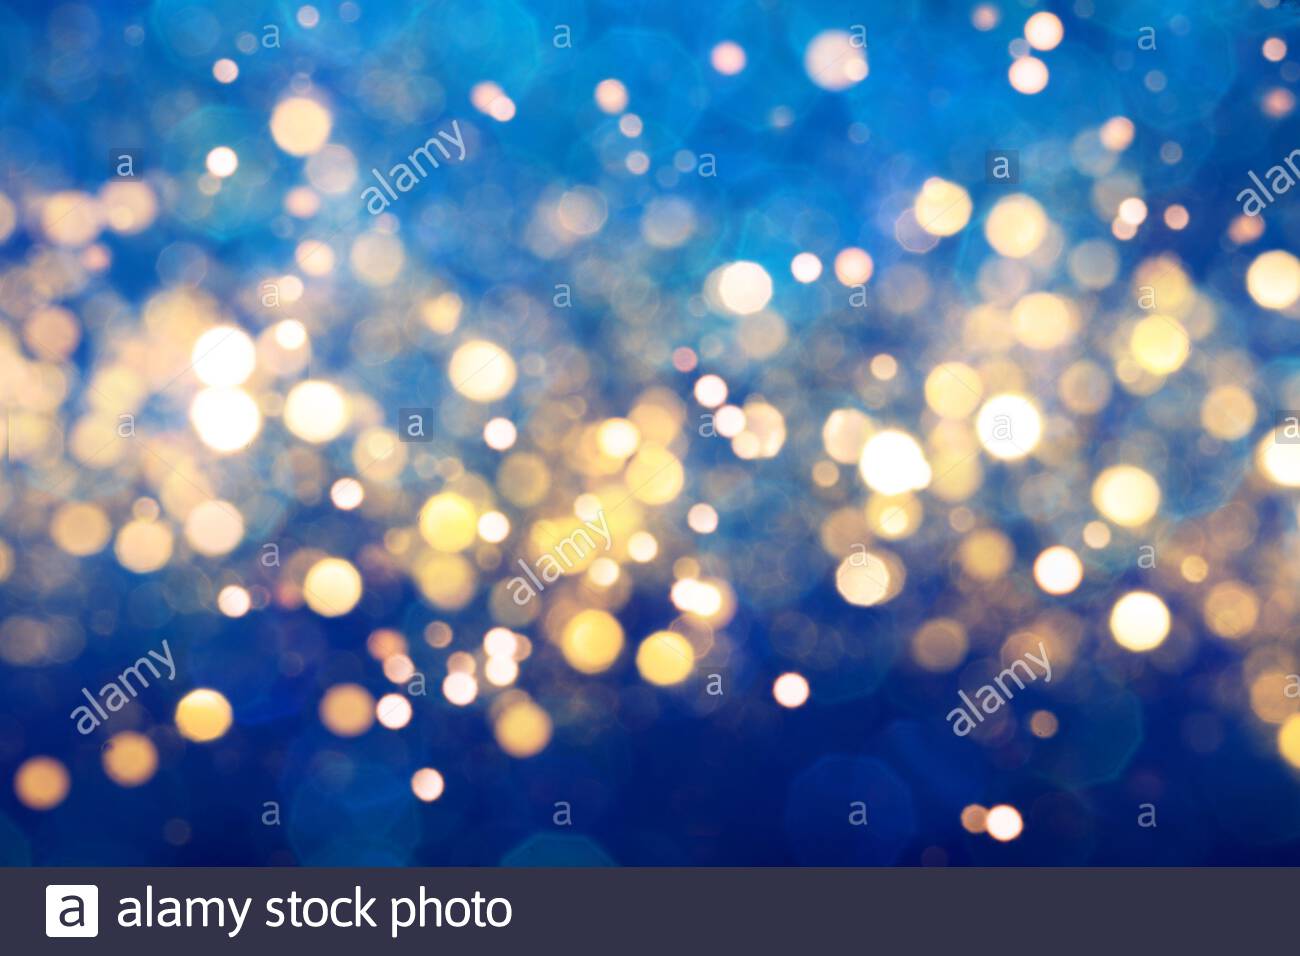 Blue Festive Background With Sparkles In The Bokeh Concept Of